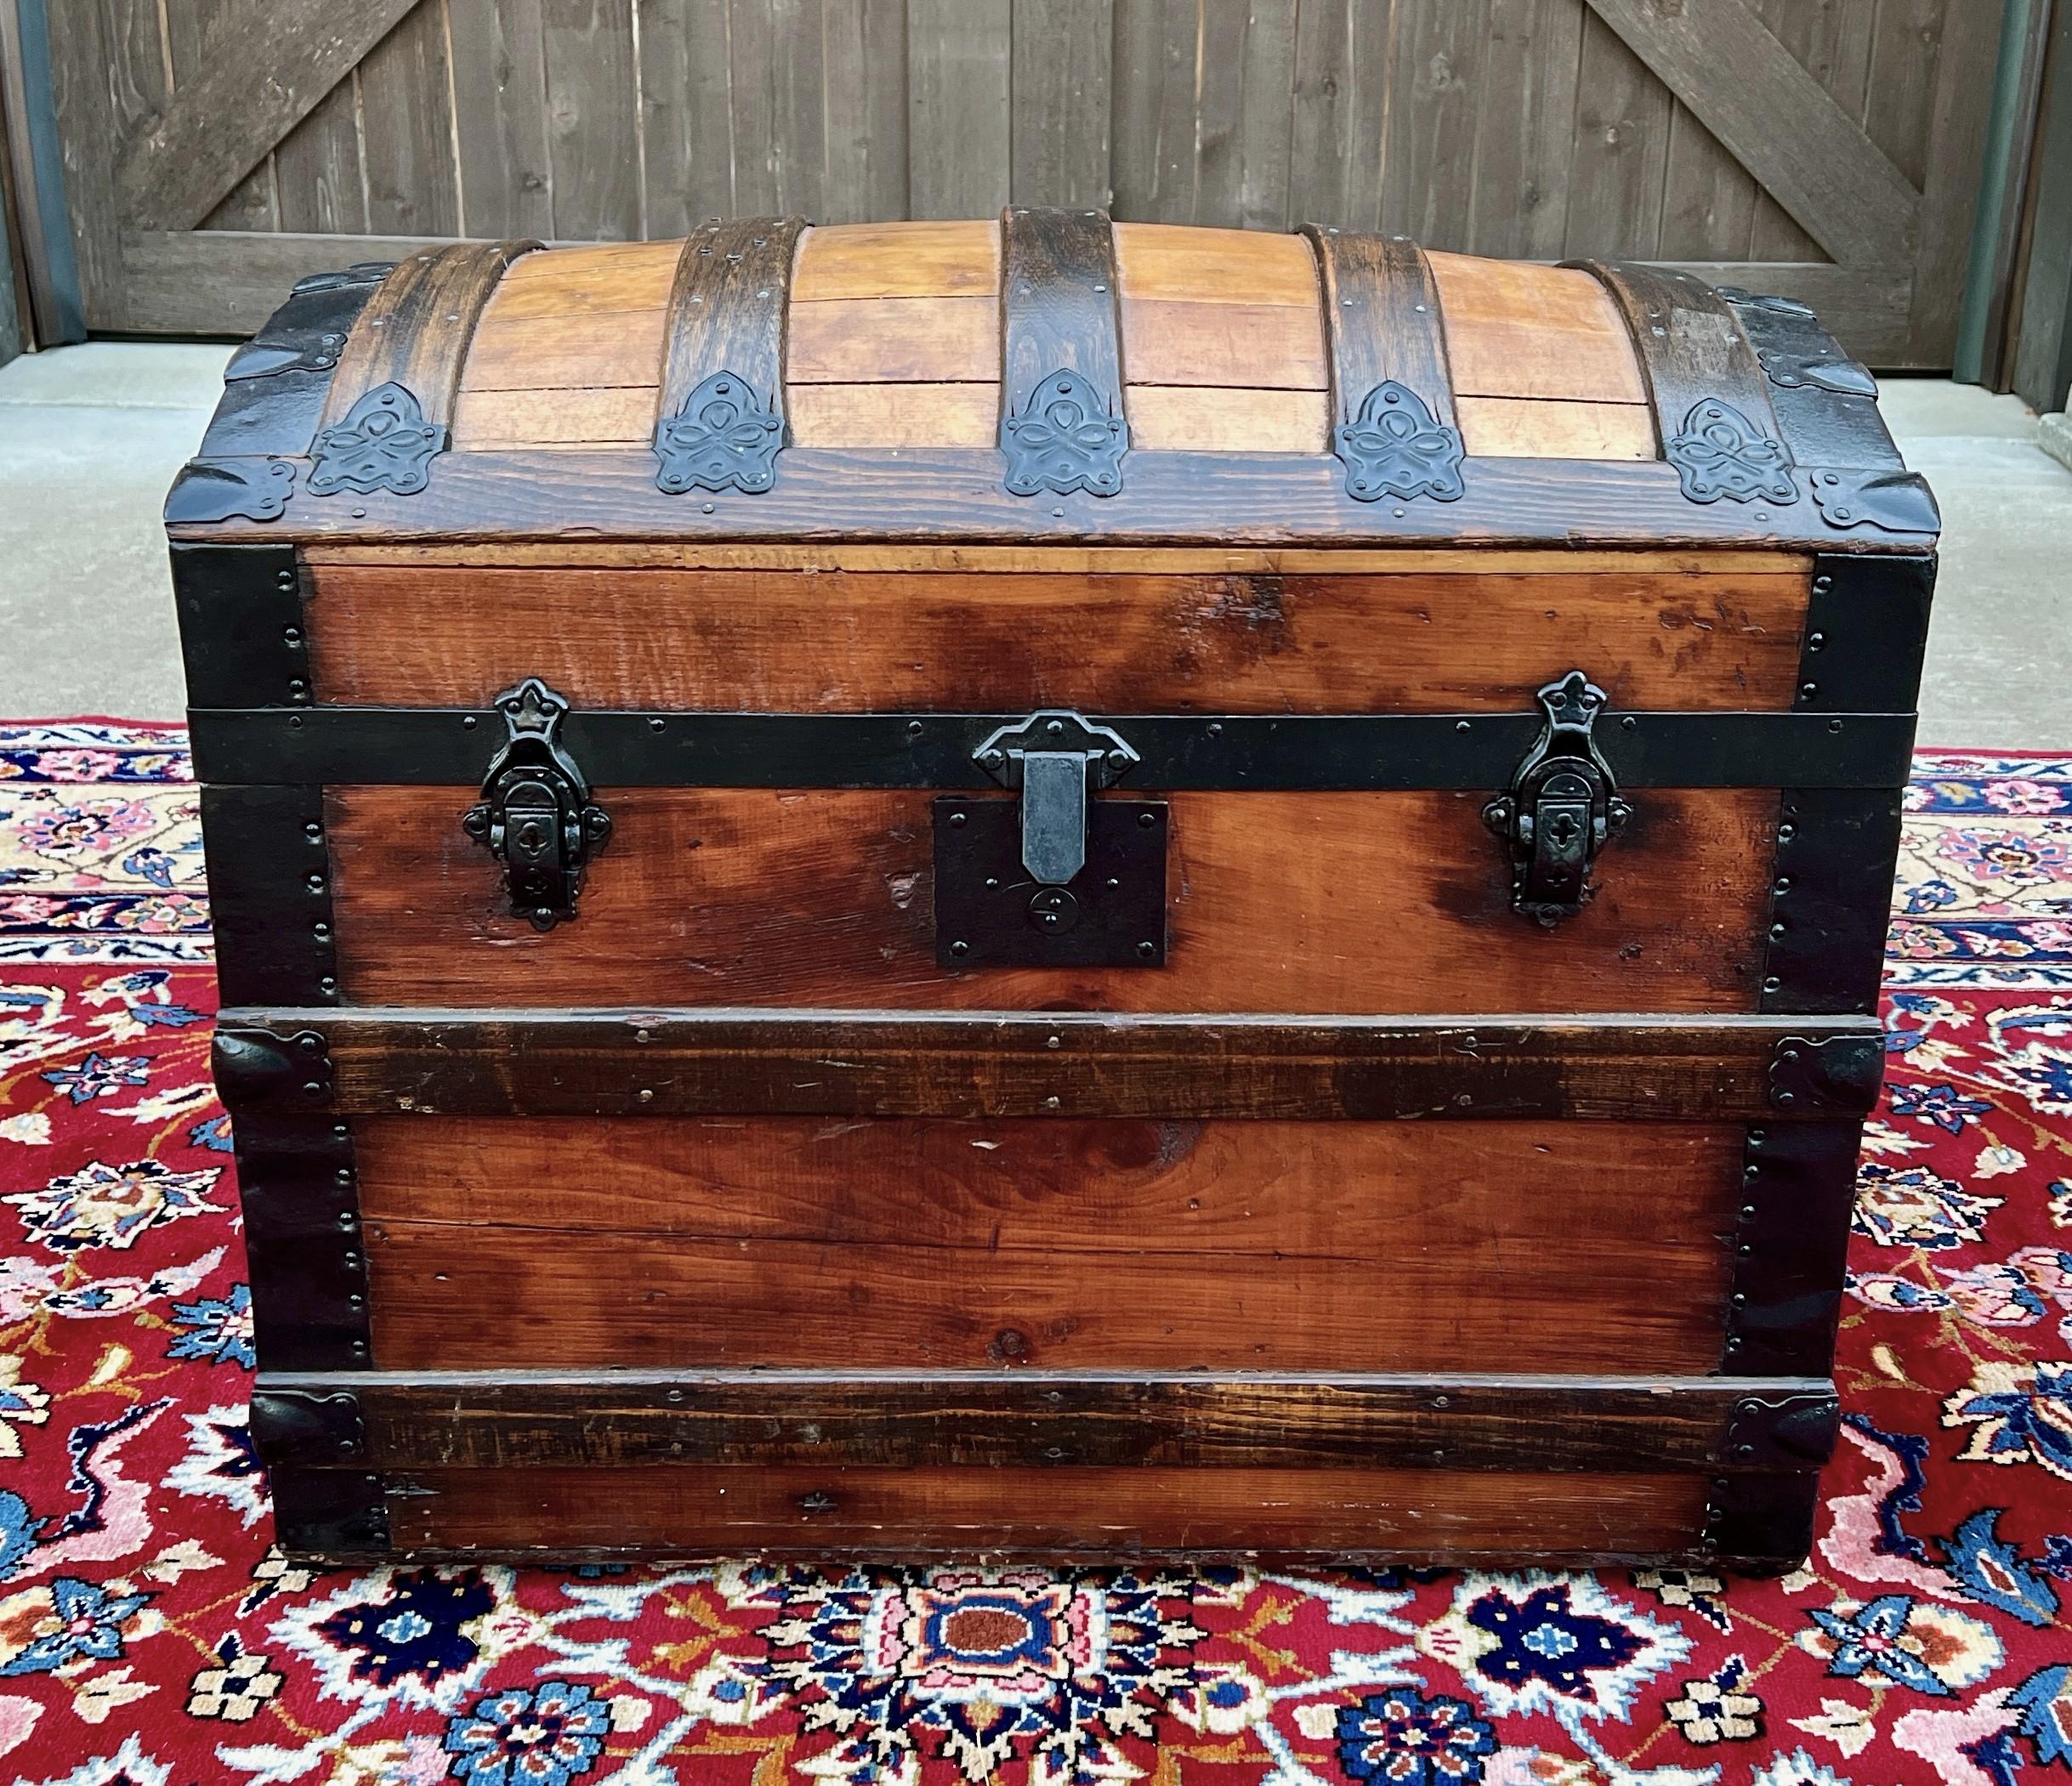 SUPERB Antique Domed Hump Back Oak Steamer Trunk, Storage Chest, or Blanket Box~~Fitted Interior~~c. 1860s-1870s

FULL of CHARACTER~~iron strapping and hardware~ refurbished

23